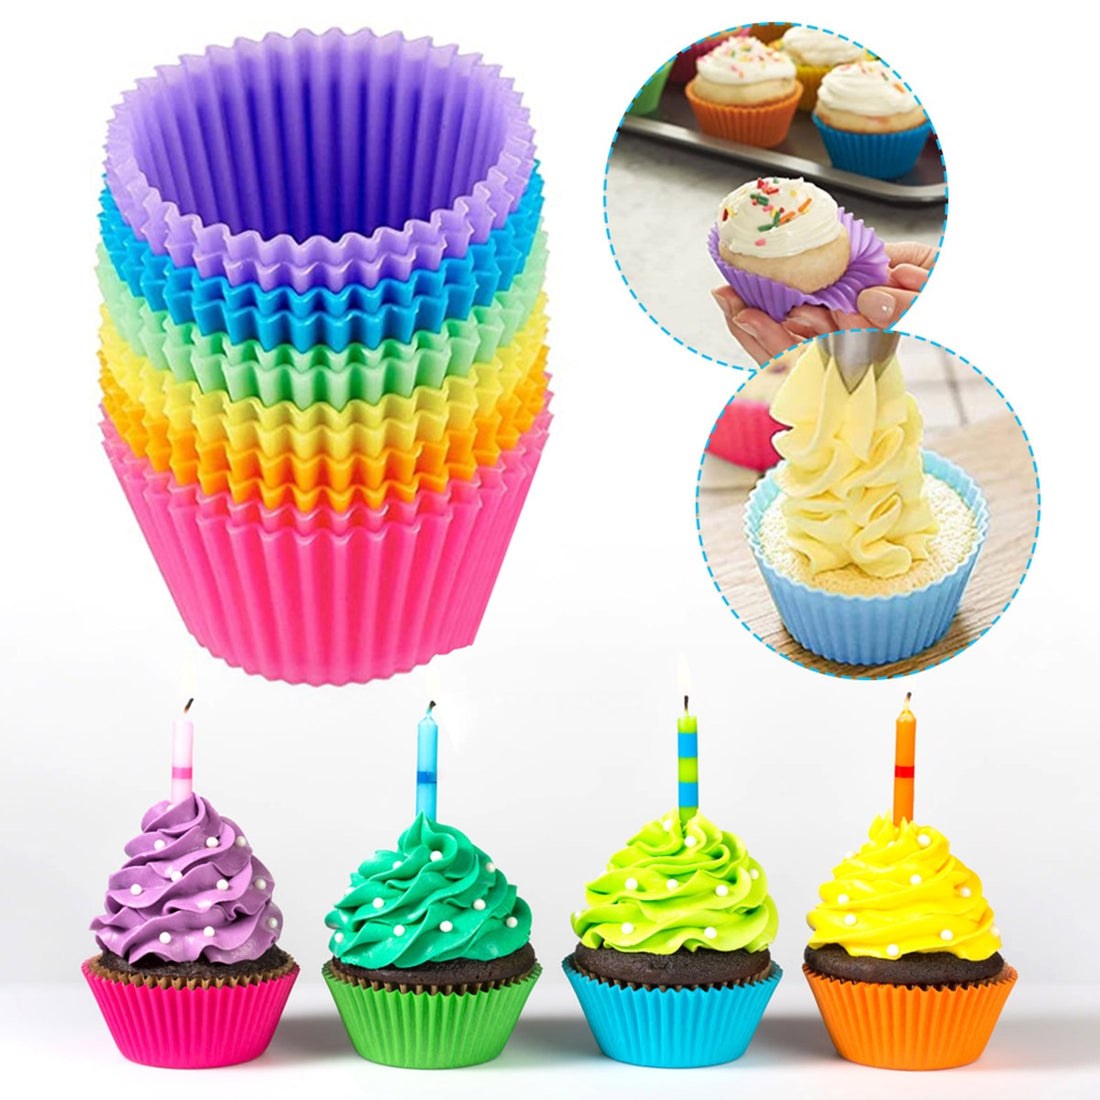 Silicone Round Cake Molds (8 Pieces) for Muffins and Cupcakes